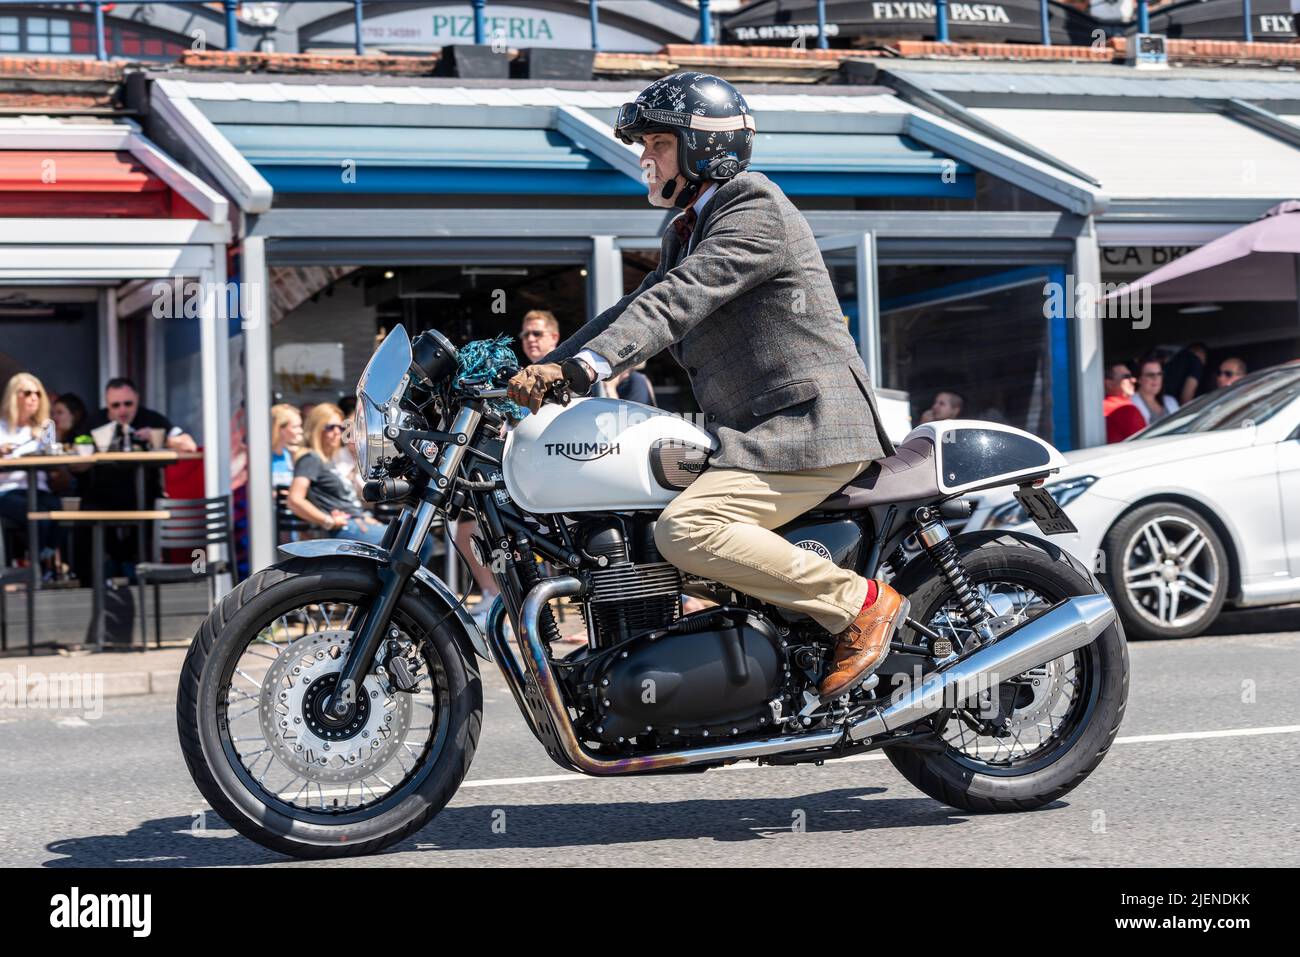 Motorcyclist taking part in the Distinguished Gentleman's Ride motorbike event, riding a Triumph Thruxton Stock Photo